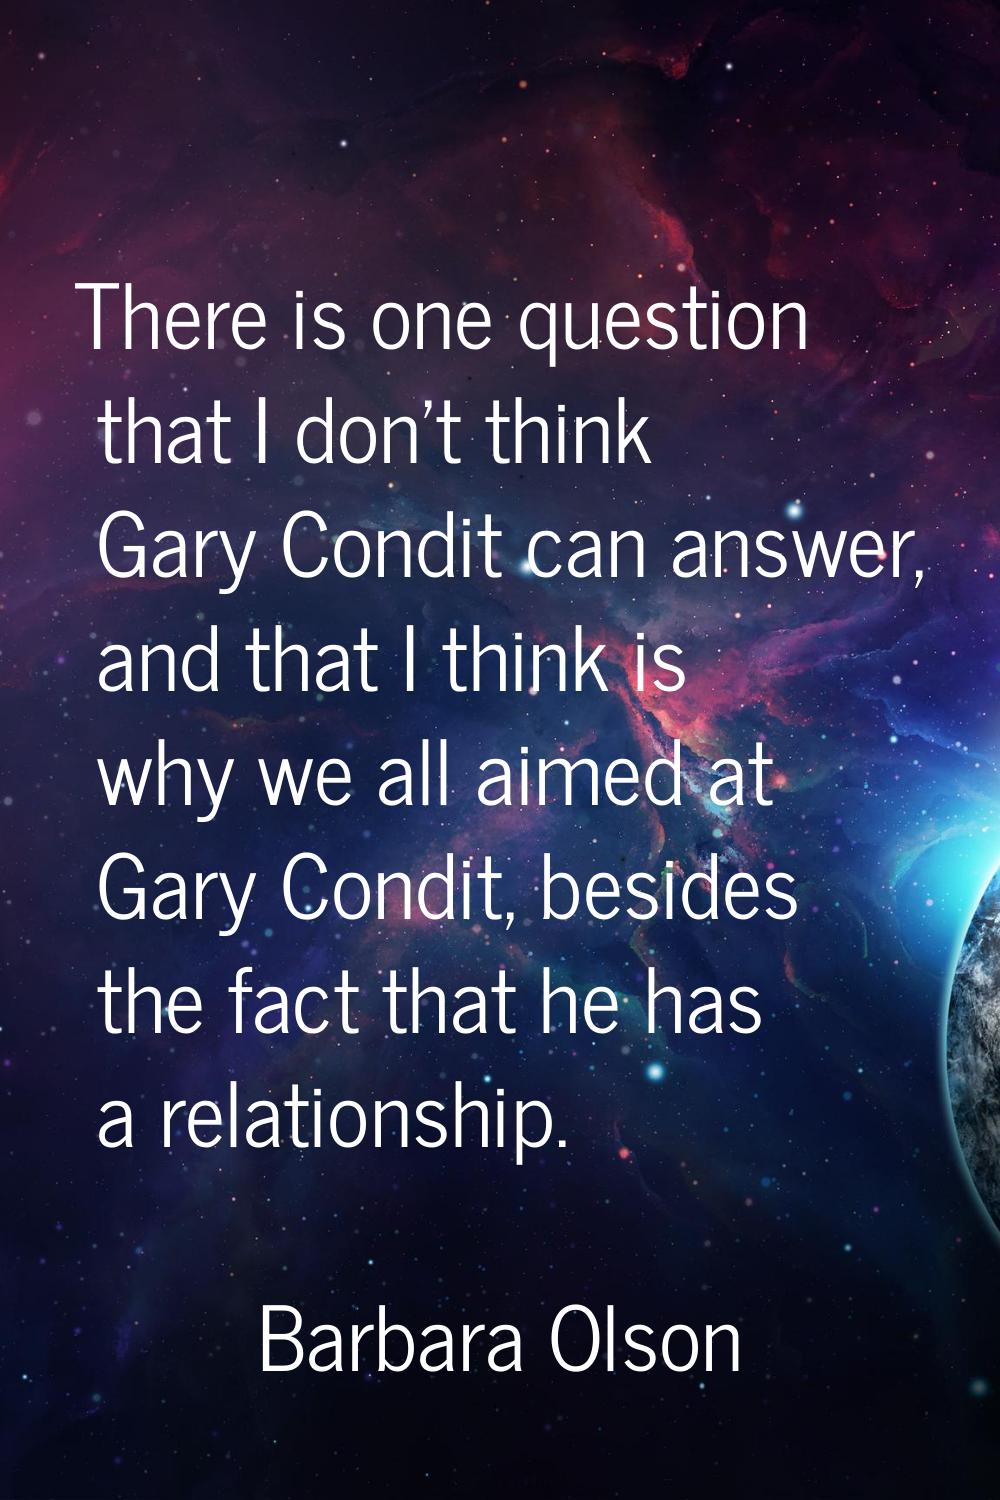 There is one question that I don't think Gary Condit can answer, and that I think is why we all aim